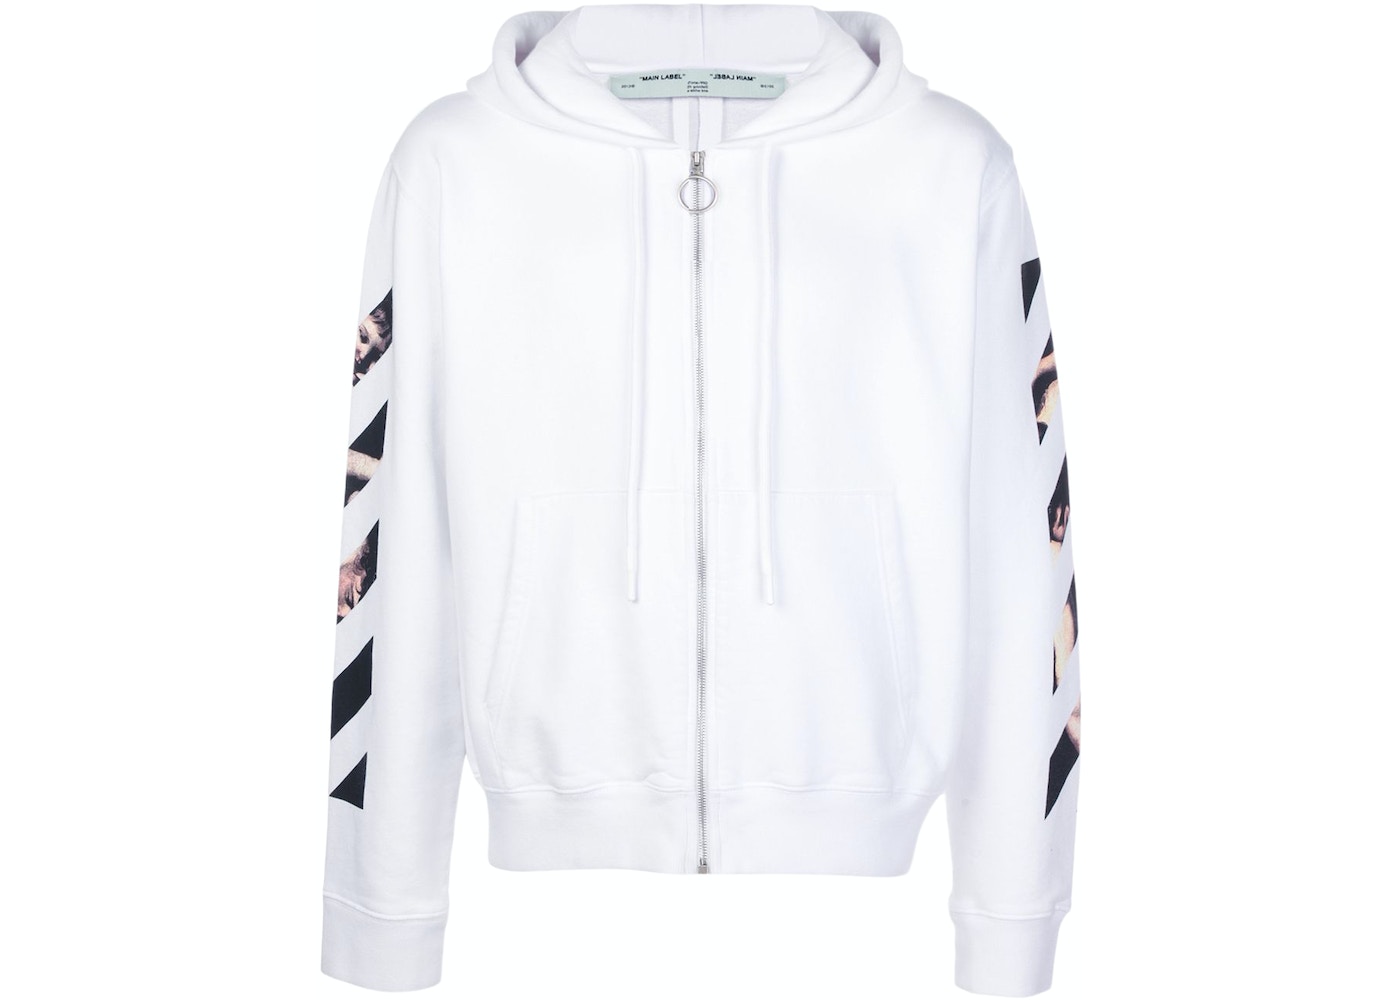 OFF-WHITE Caravaggio Arrows Zip Up Hoodie White - SS20